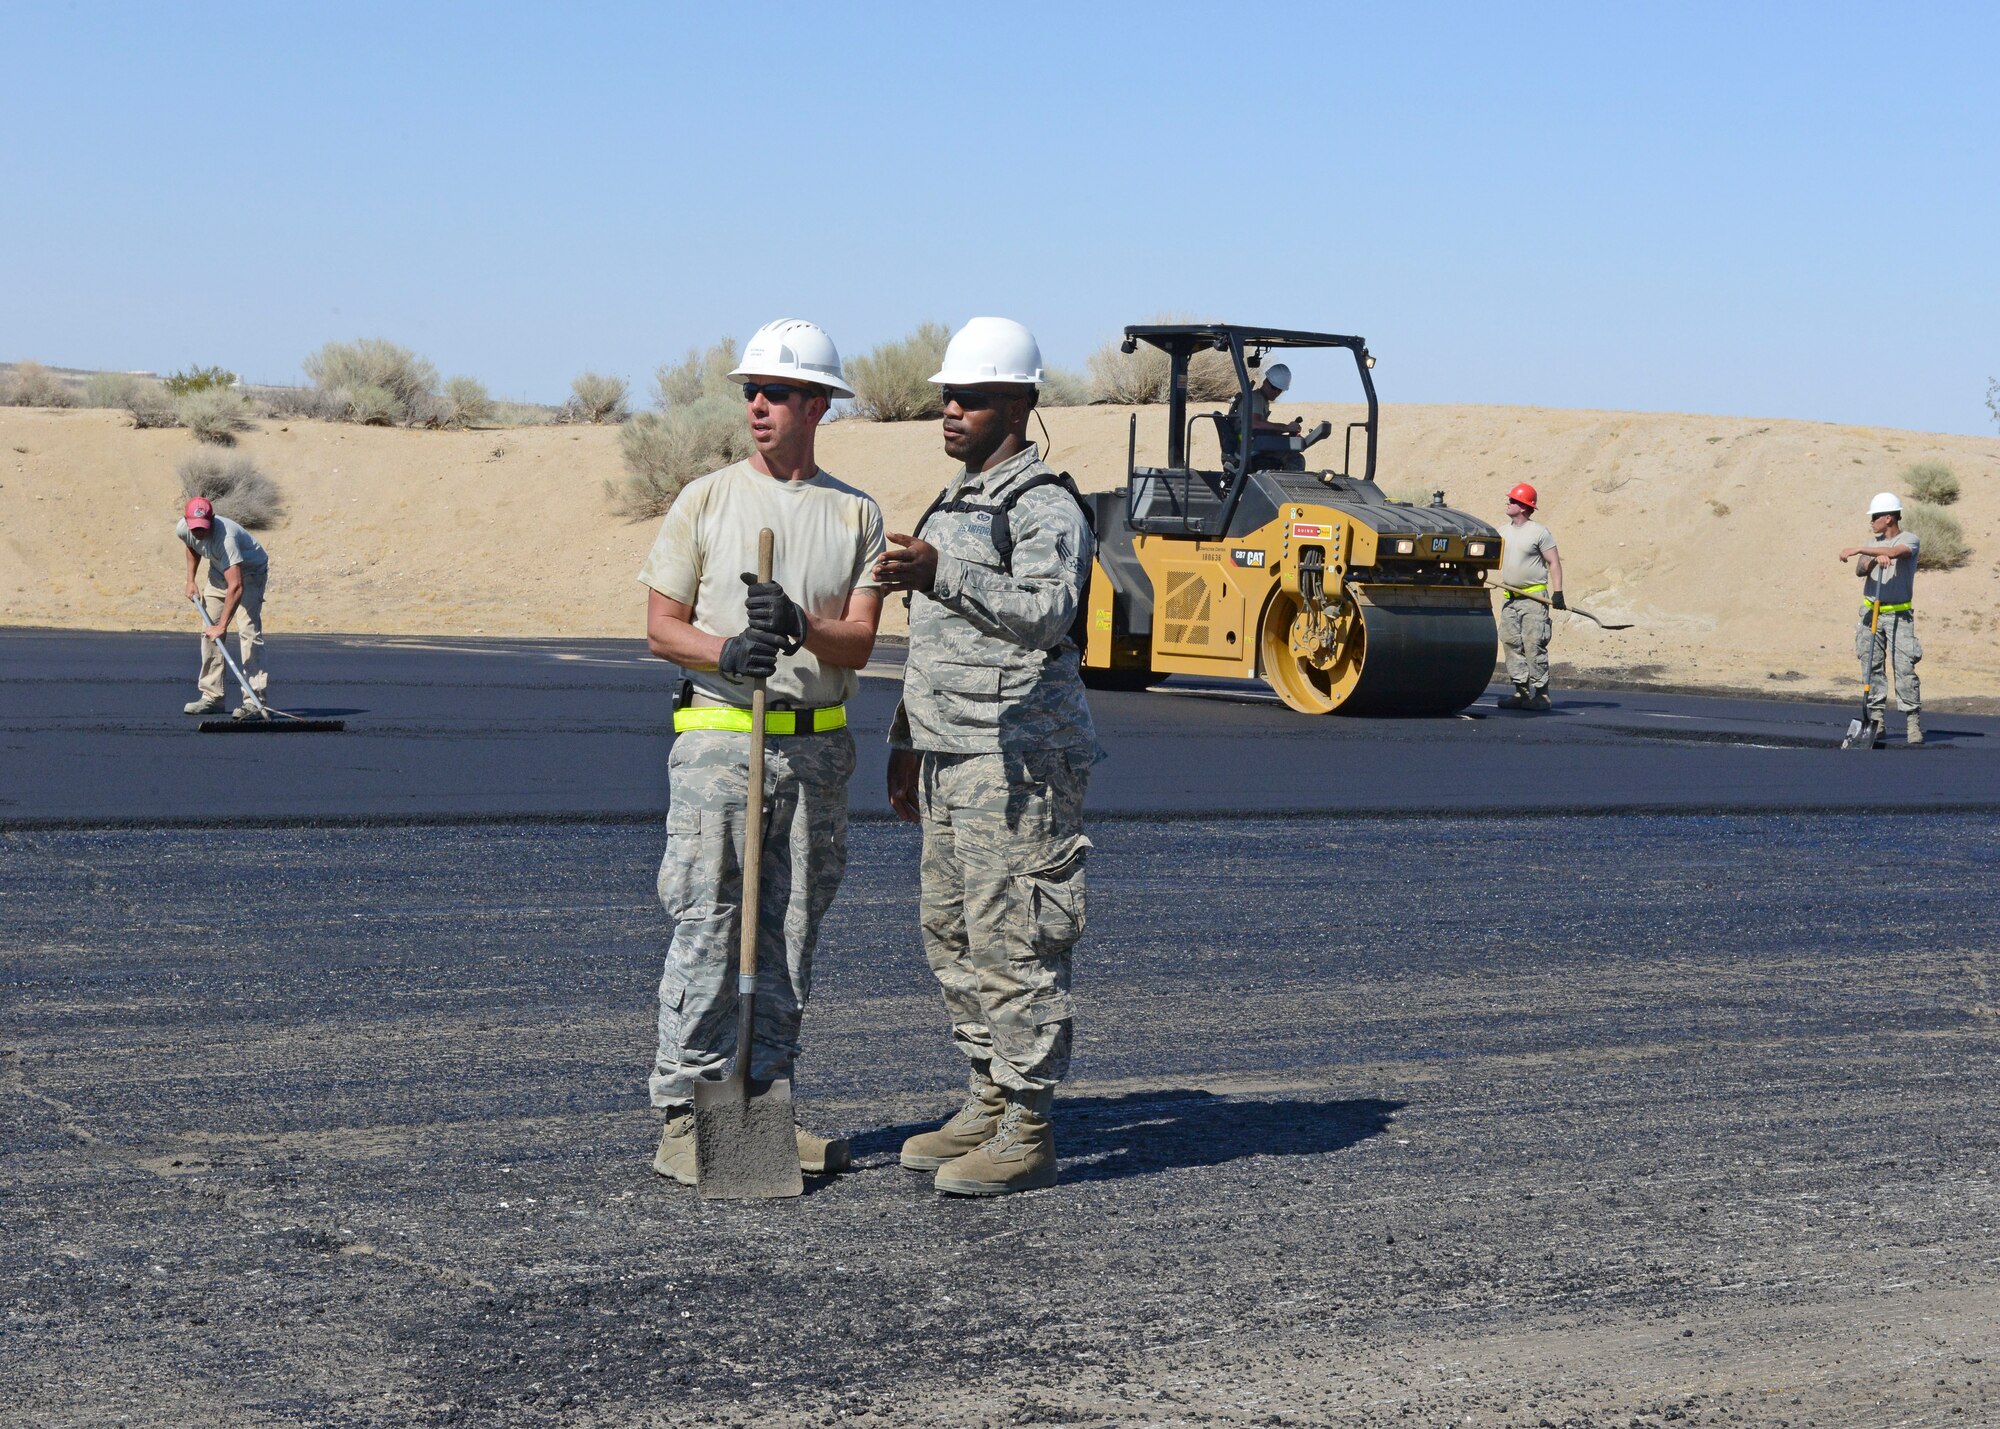 More than 80 Airmen from across the nation joined the 412th Civil Engineer Squadron to complete three large construction projects at Edwards.